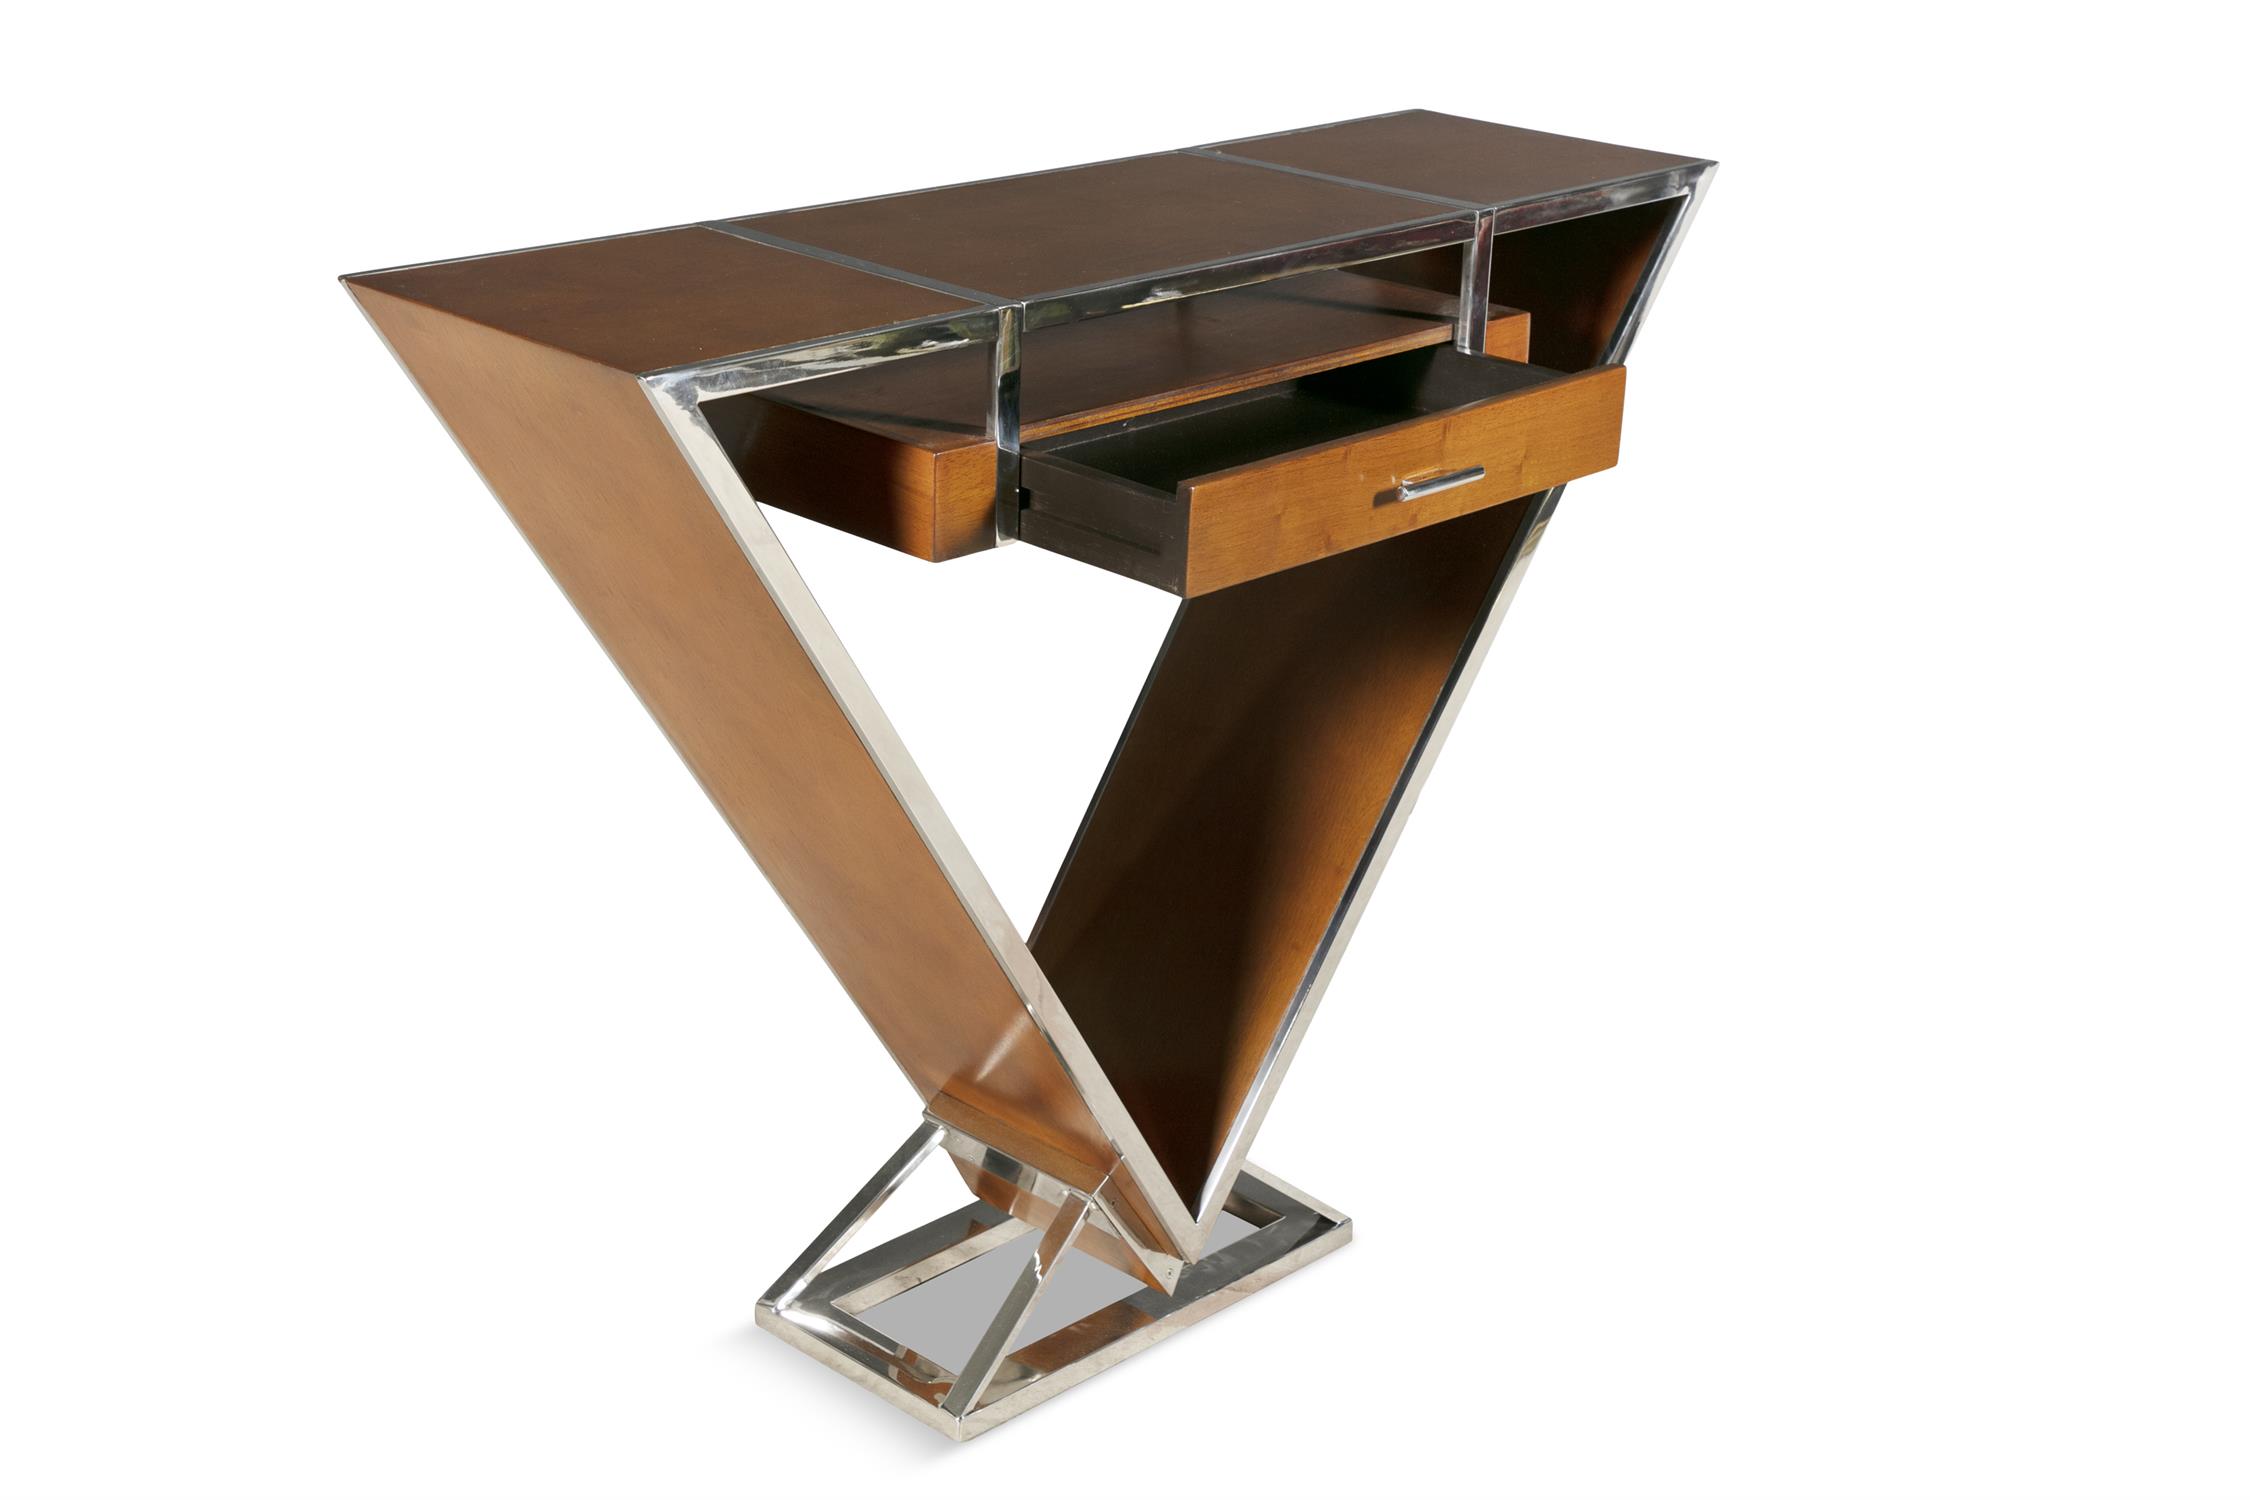 CONSOLE A triangular shaped console with a single drawer. Chrome and teak. France. - Image 5 of 7